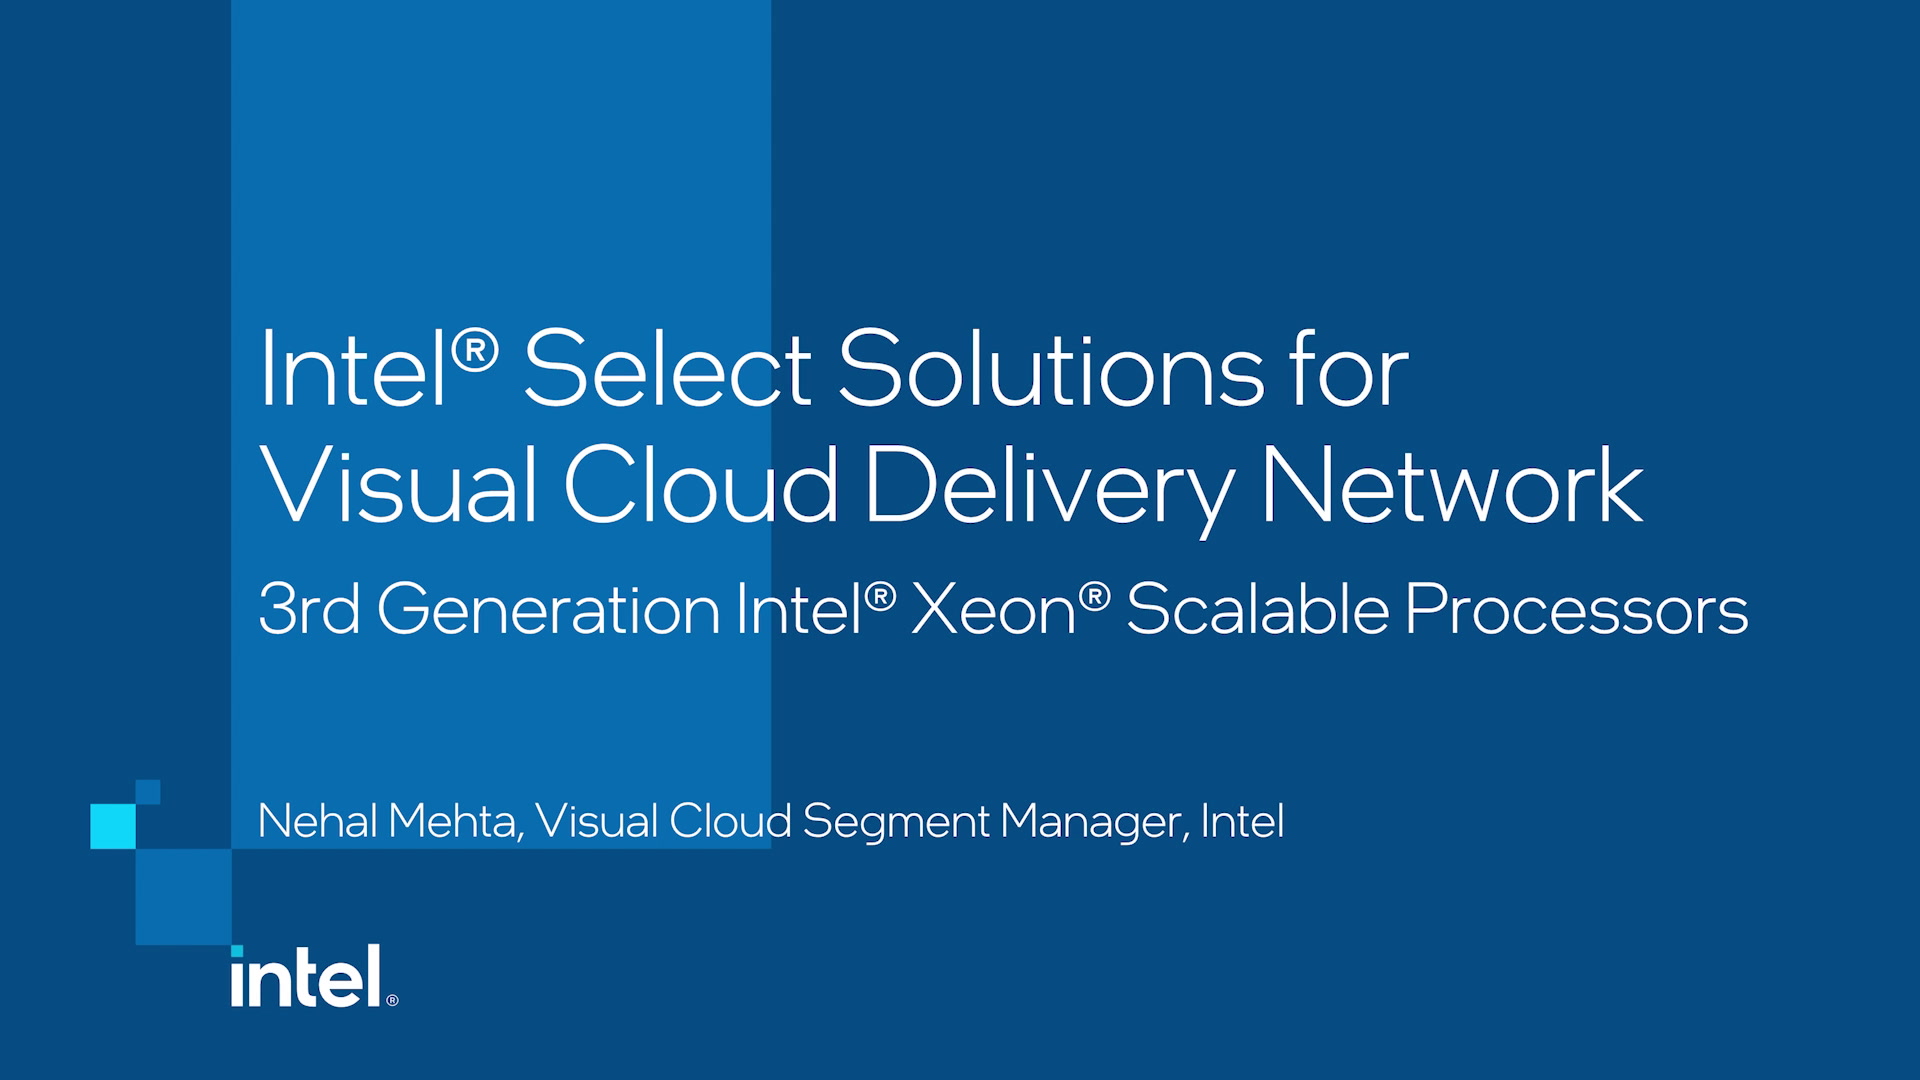 Intel® Select Solutions for Visual Cloud Content Delivery Networks